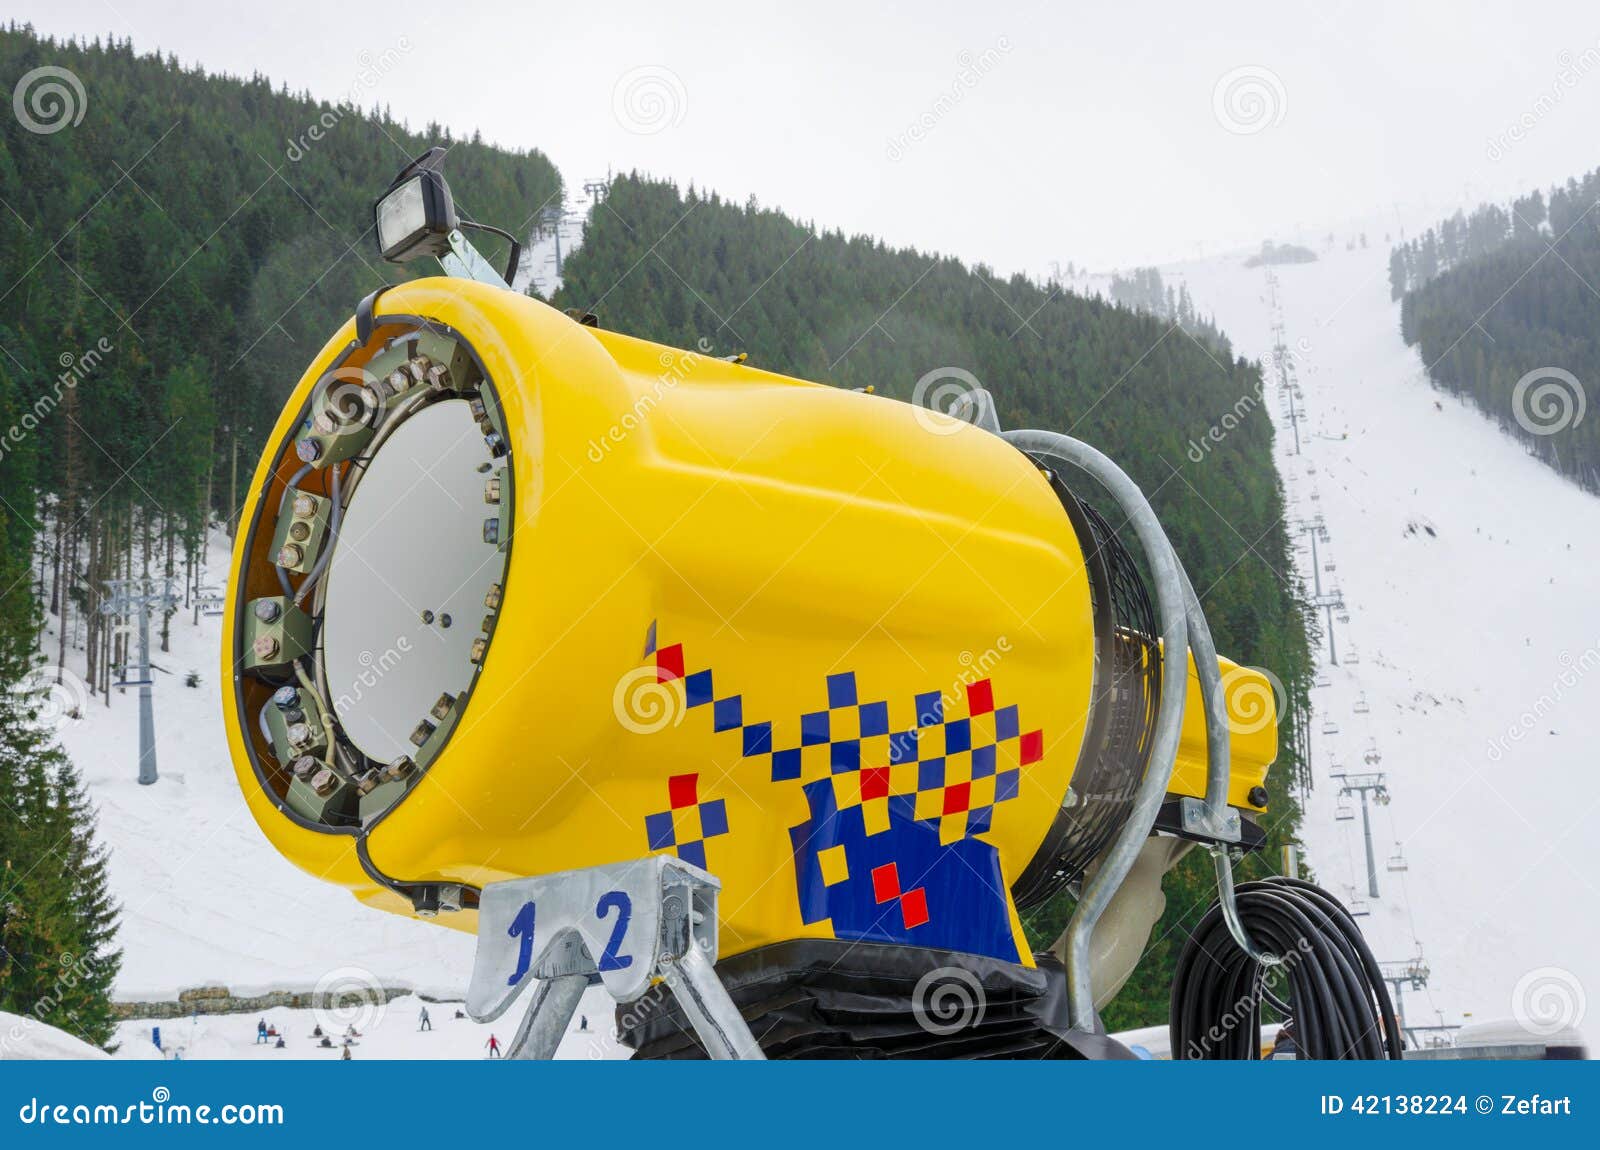 Professional Artificial Snow Machine Cannon Making Snowflakes From Water At  Ski Resort Stock Photo, Picture and Royalty Free Image. Image 90232119.